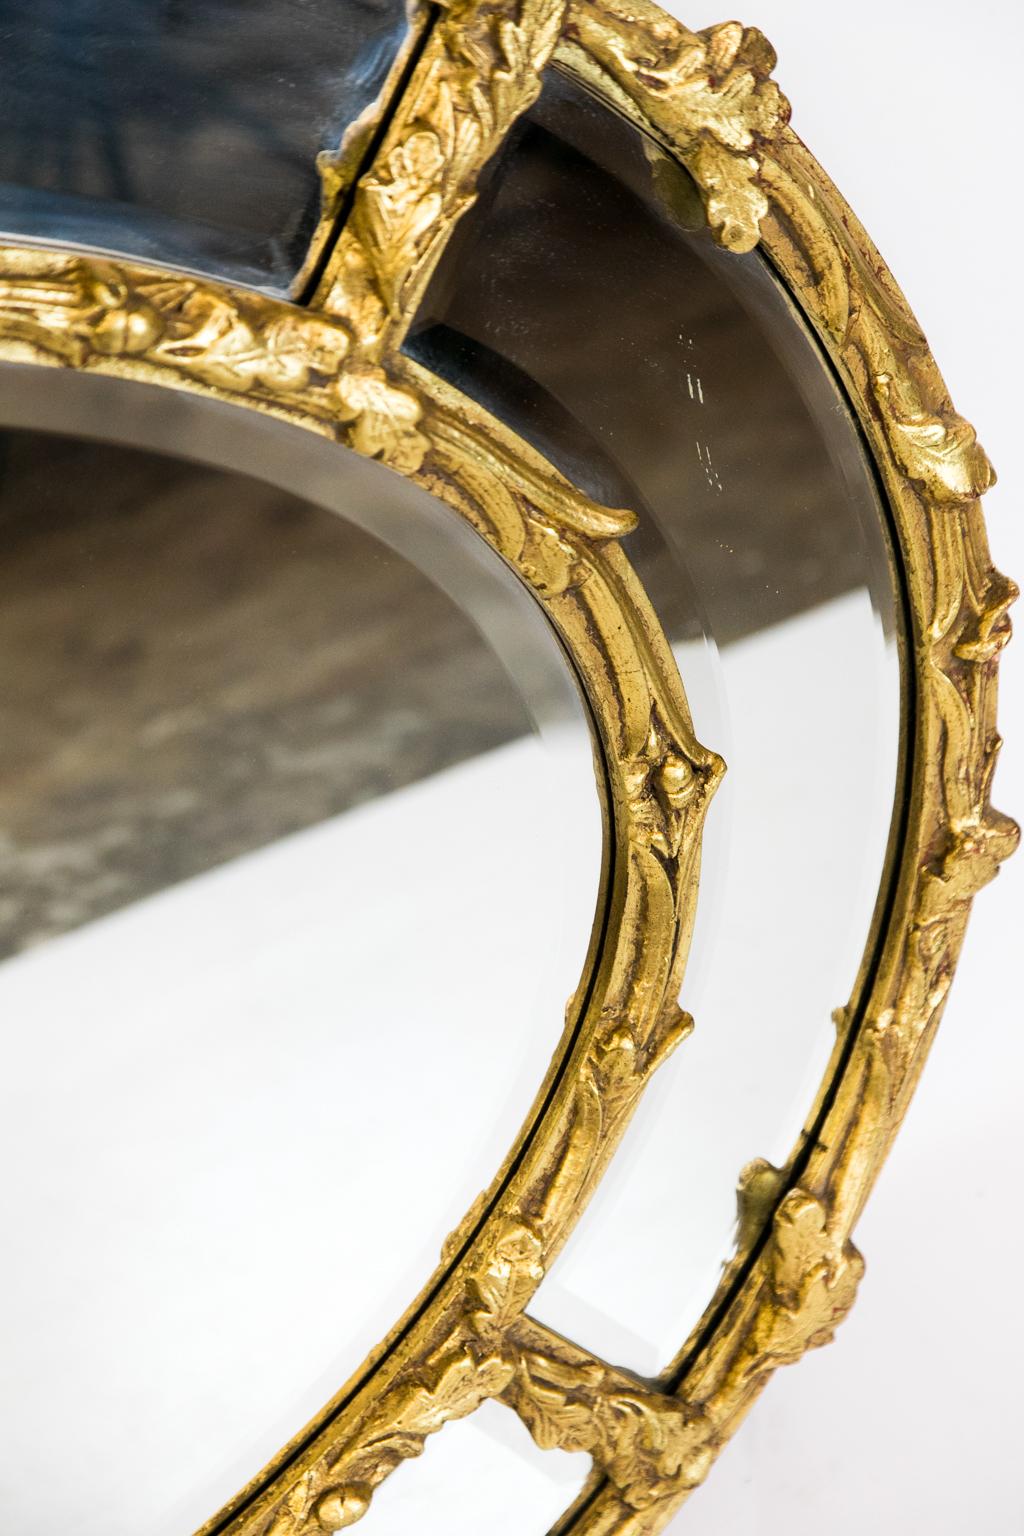 American Oval Gold Mirror